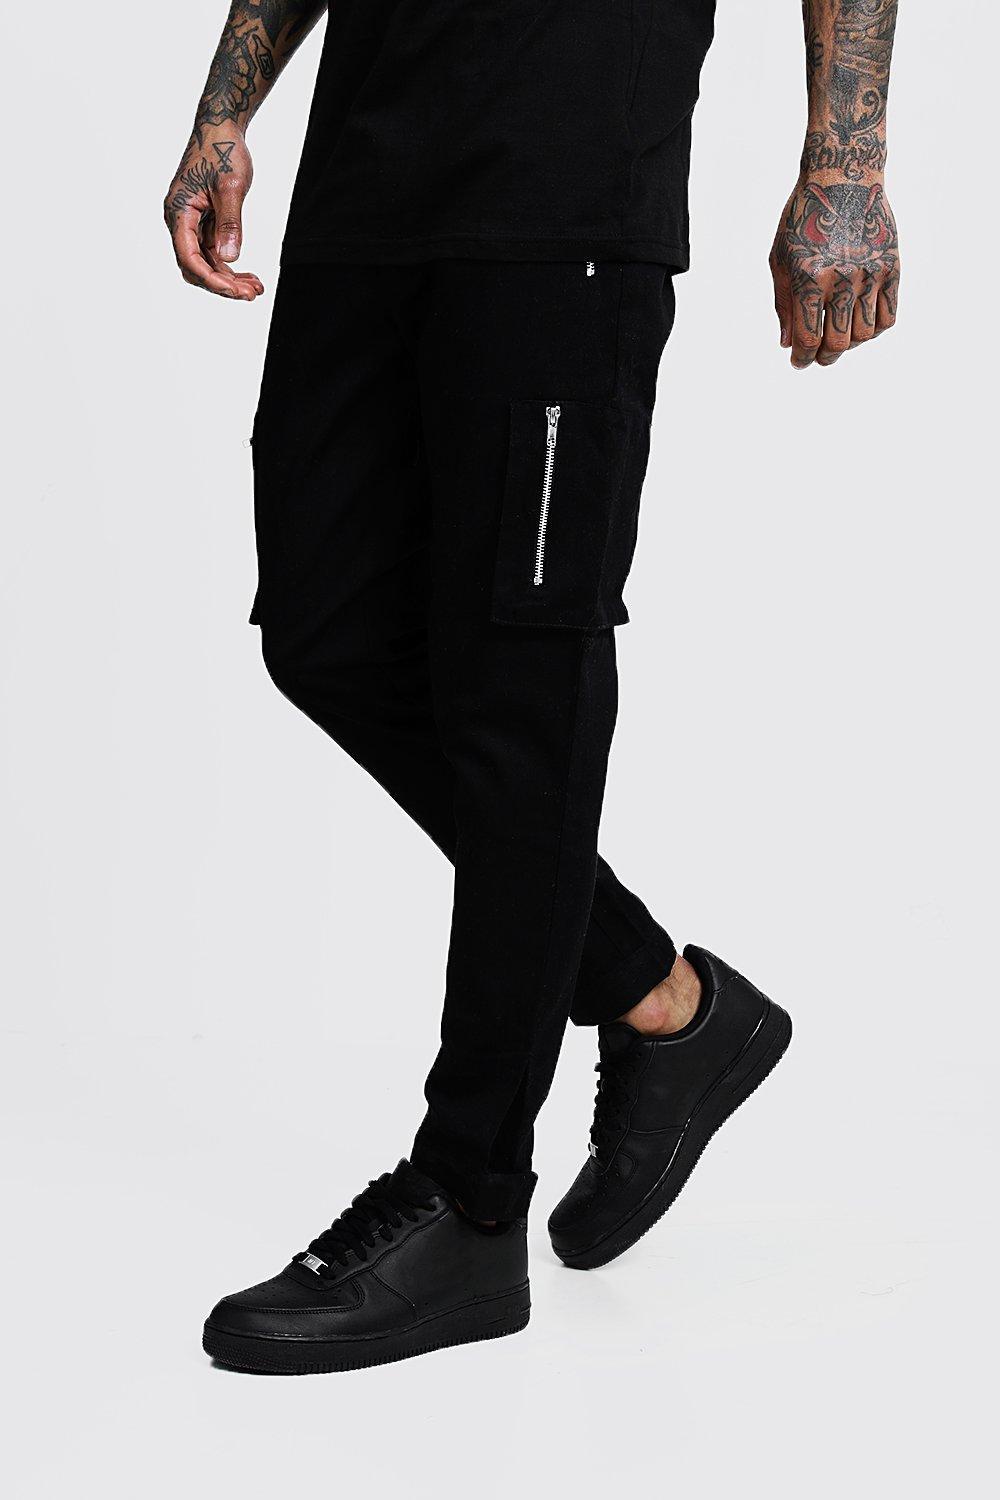 Boohoo Slim Fit Cargo Pants With Velcro Cuff in Black for Men - Lyst